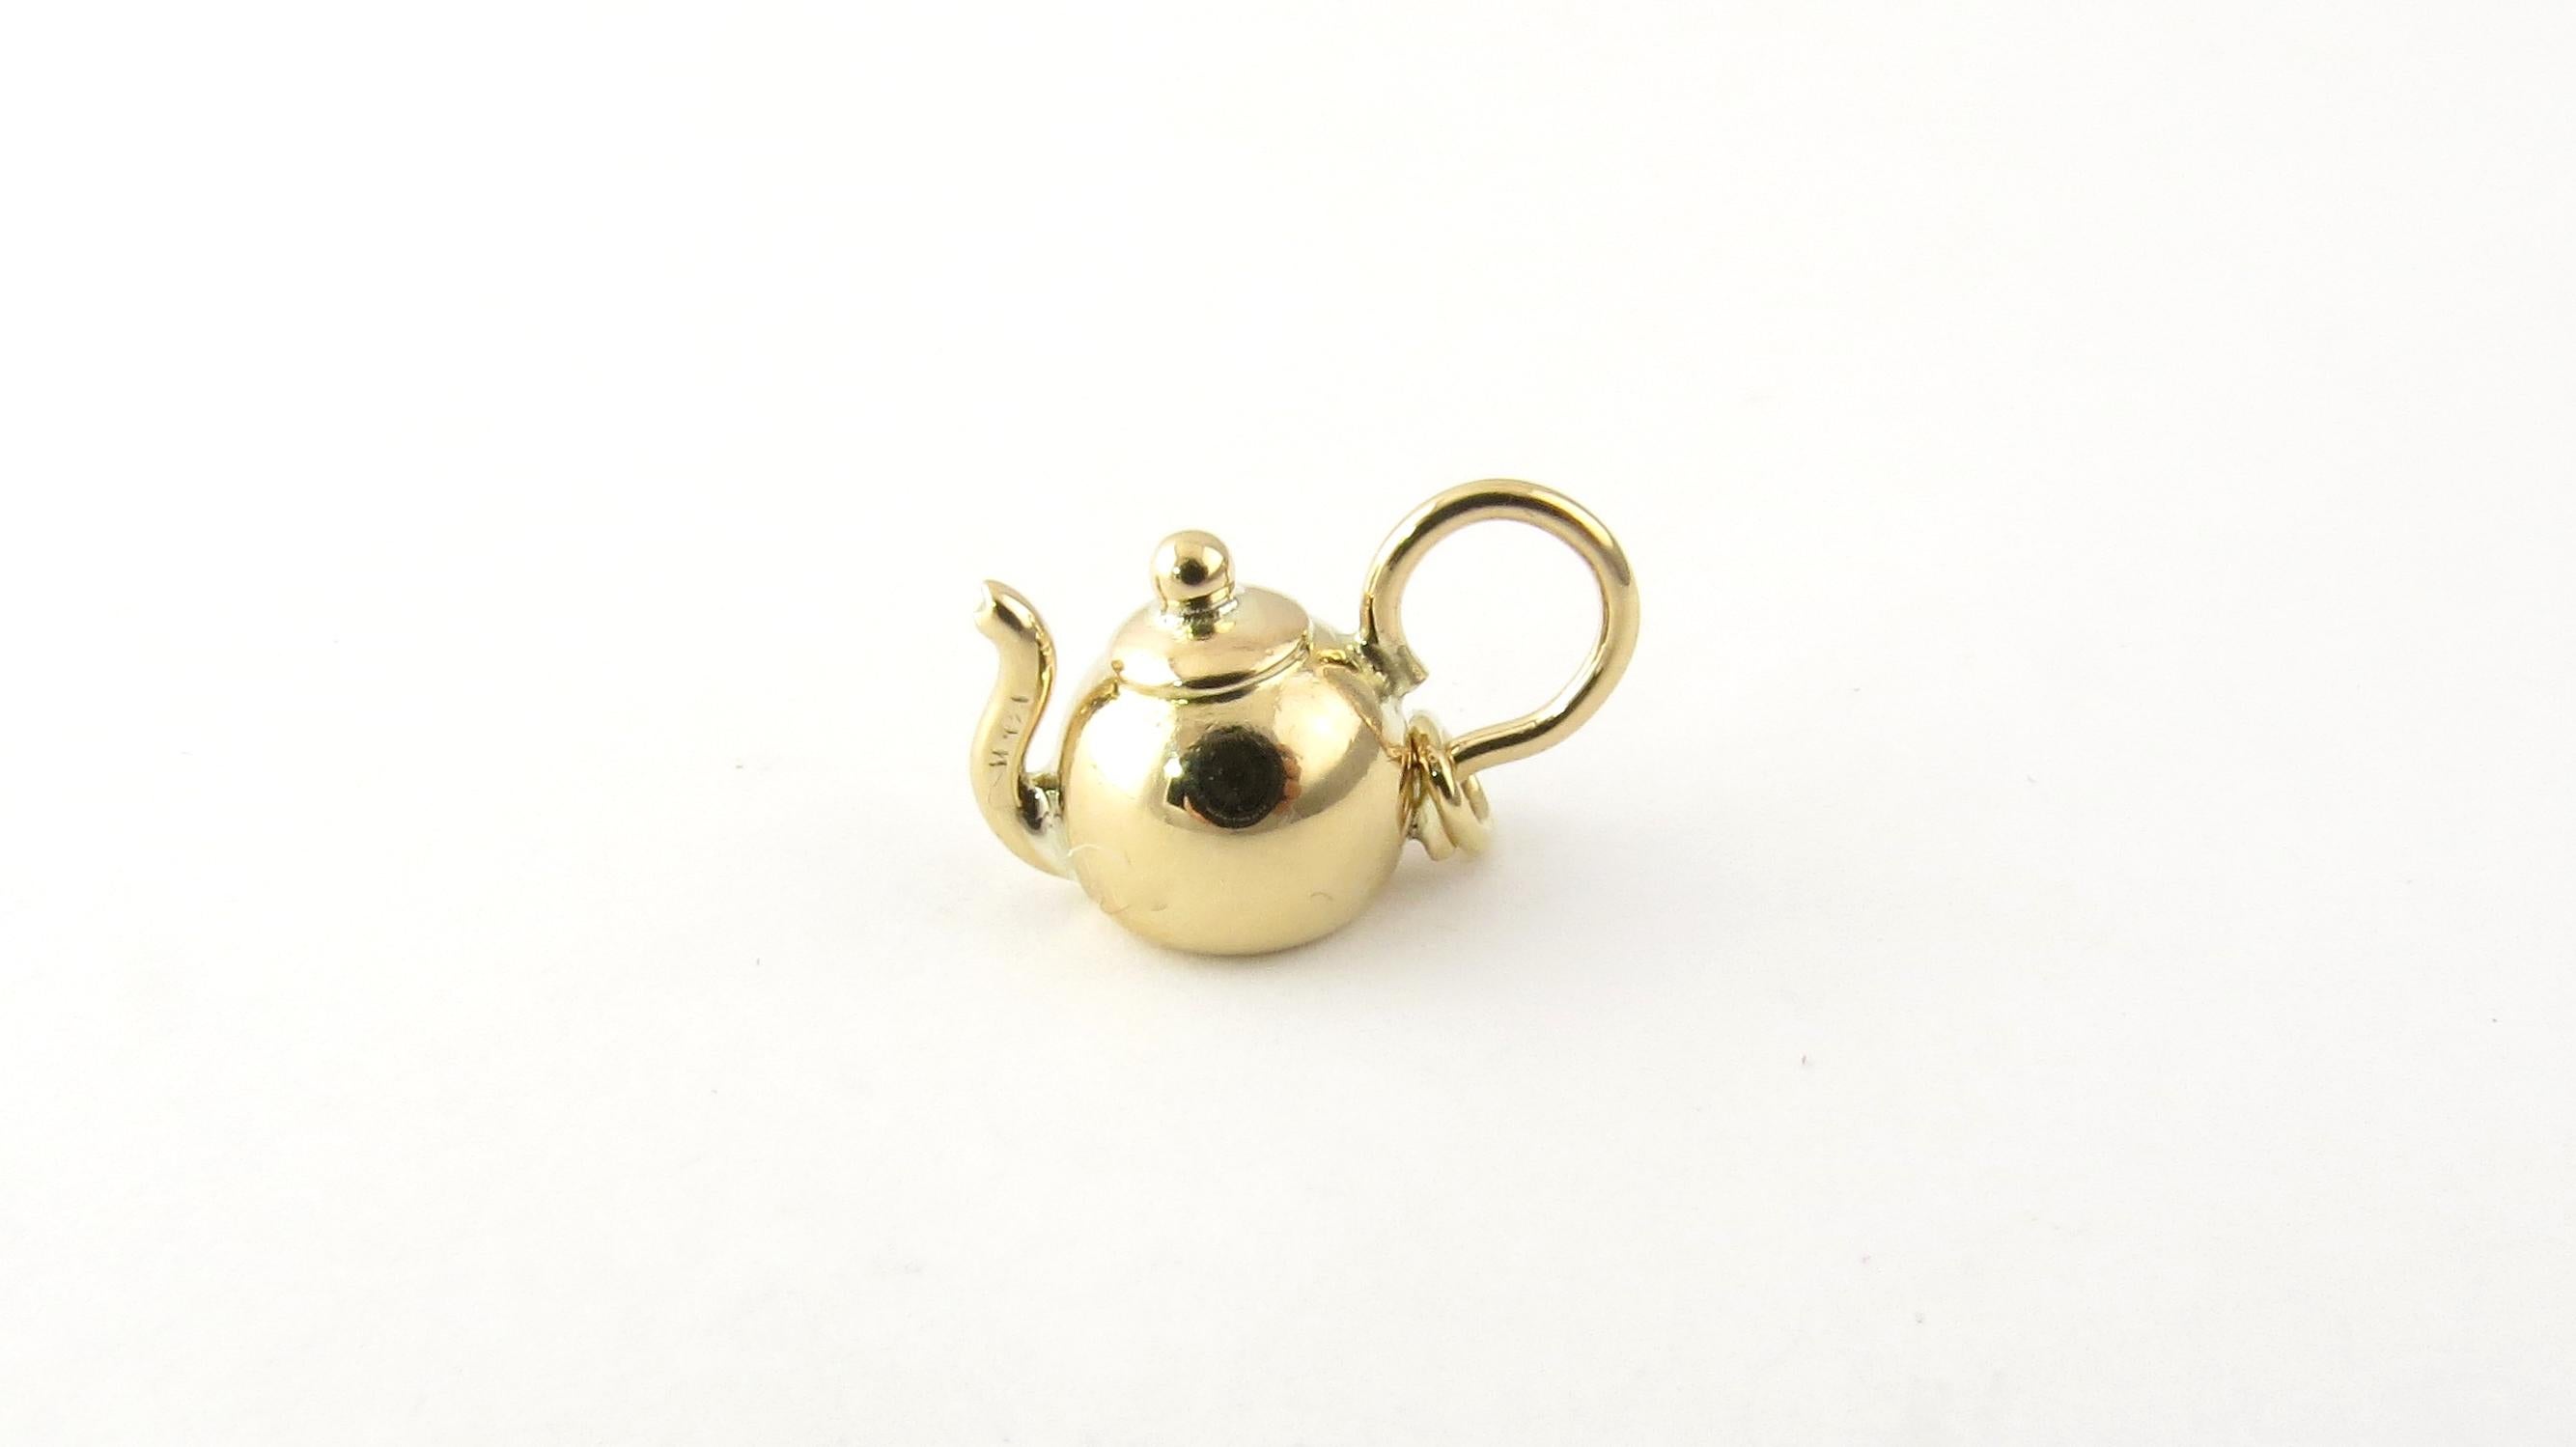 Vintage 14 Karat Yellow Gold Teapot Charm

Tea time!

This lovely 3D charm features a miniature teapot meticulously detailed in 14K yellow gold.

Size: 11 mm x 15 mm

Weight: 0.9 dwt. / 1.4 gr.

Acid tested for 14K gold.

Very good condition,